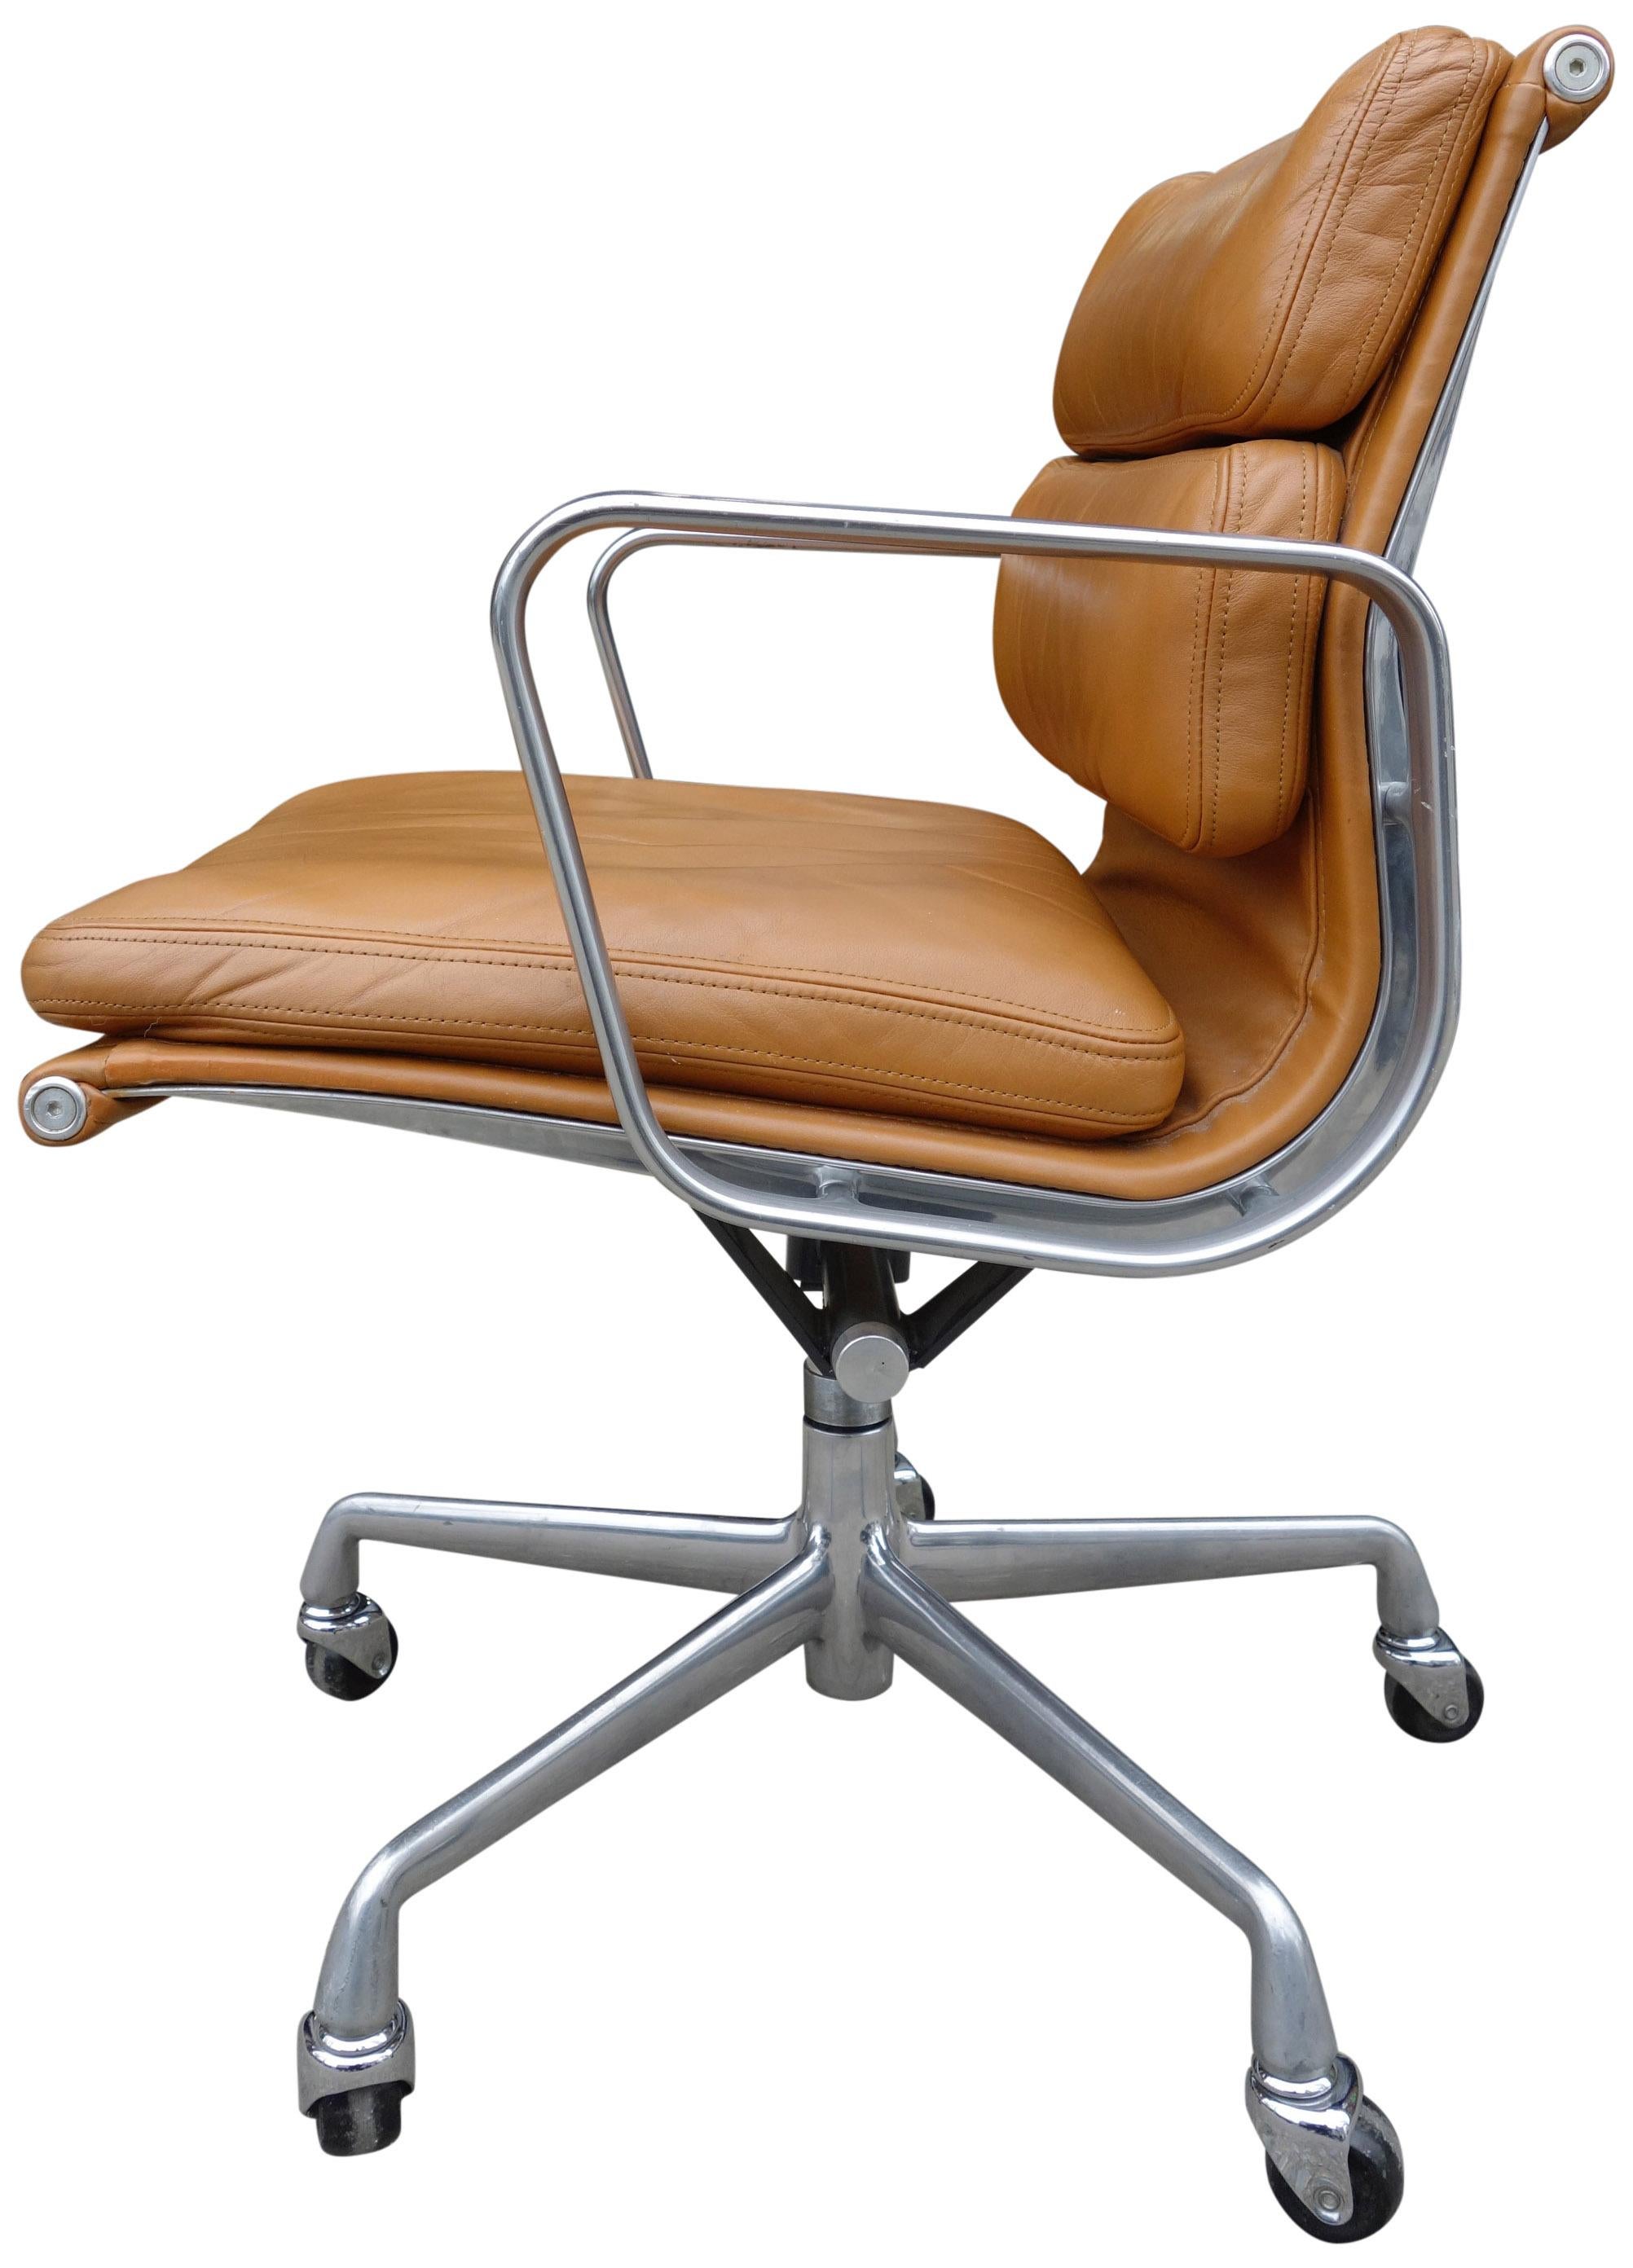 For your consideration is this authentic Eames for Herman Miller vintage soft pad chairs in brown leather. Adjustable tilt and height adjustment. These authentic vintage examples are icons of Mid-Century Modern design. These chairs are part of the